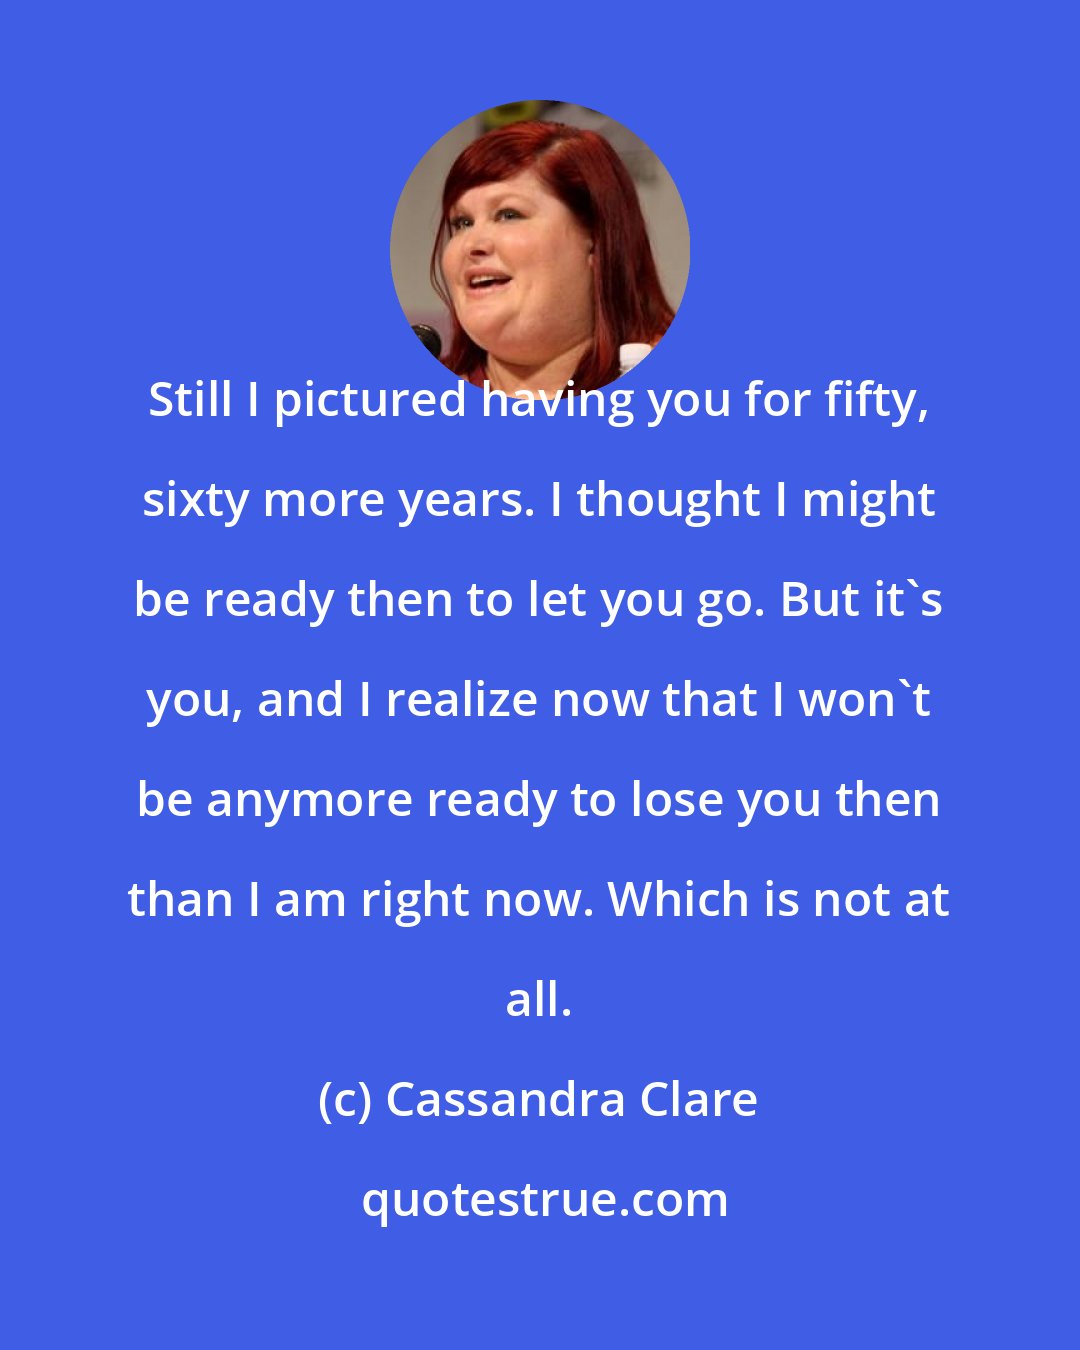 Cassandra Clare: Still I pictured having you for fifty, sixty more years. I thought I might be ready then to let you go. But it's you, and I realize now that I won't be anymore ready to lose you then than I am right now. Which is not at all.